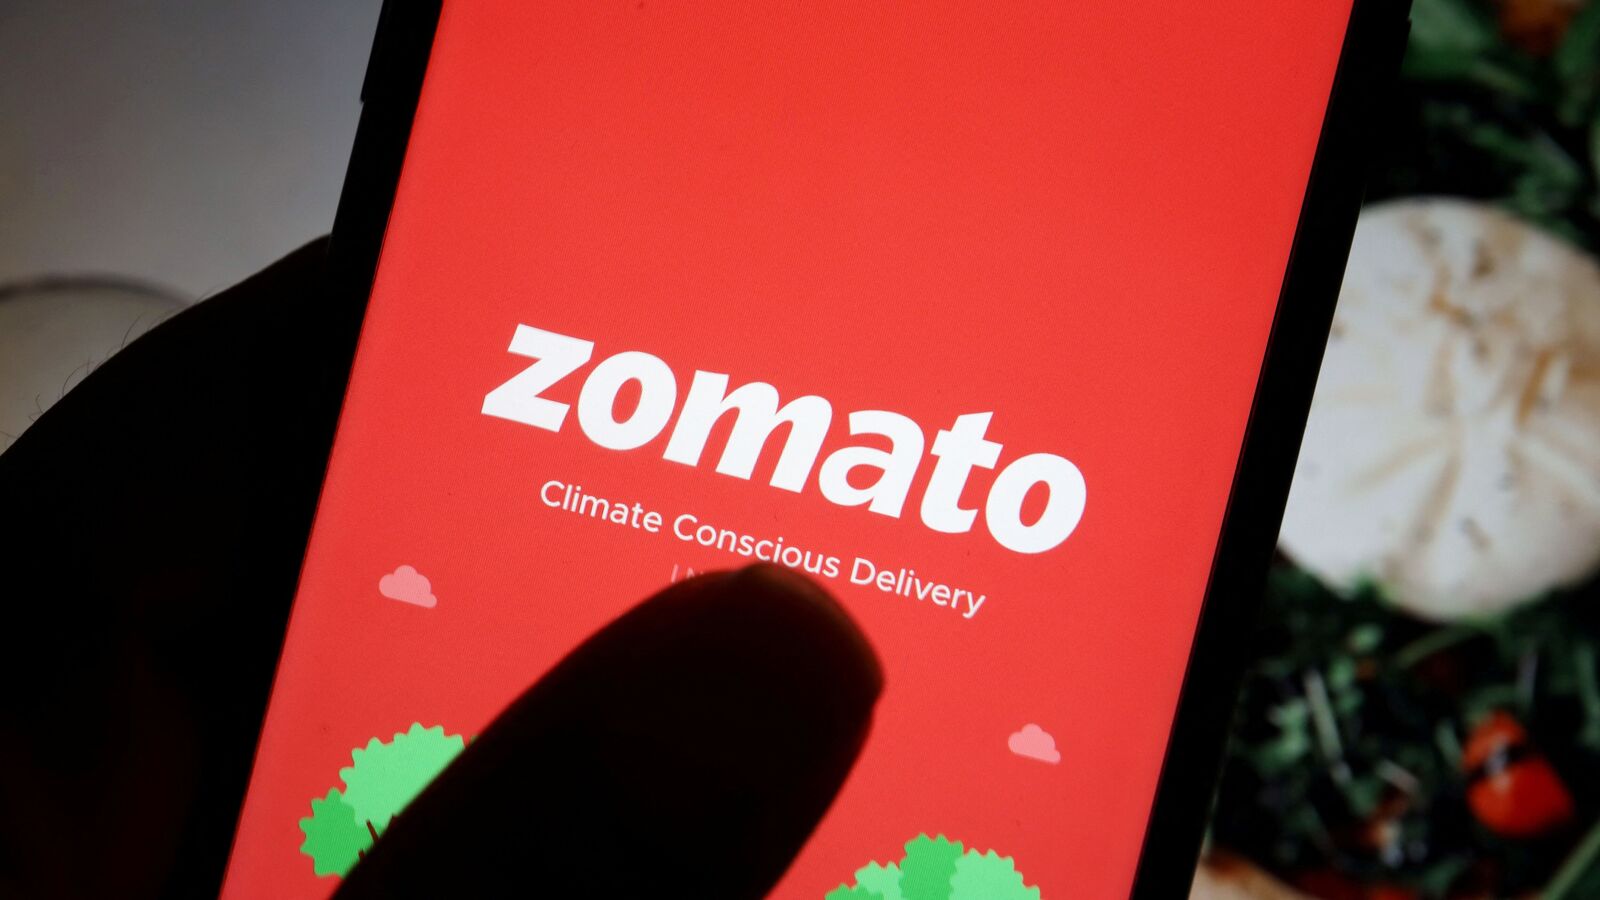 Zomato share price falls 6% after Q4 results. Opportunity to buy the stock?